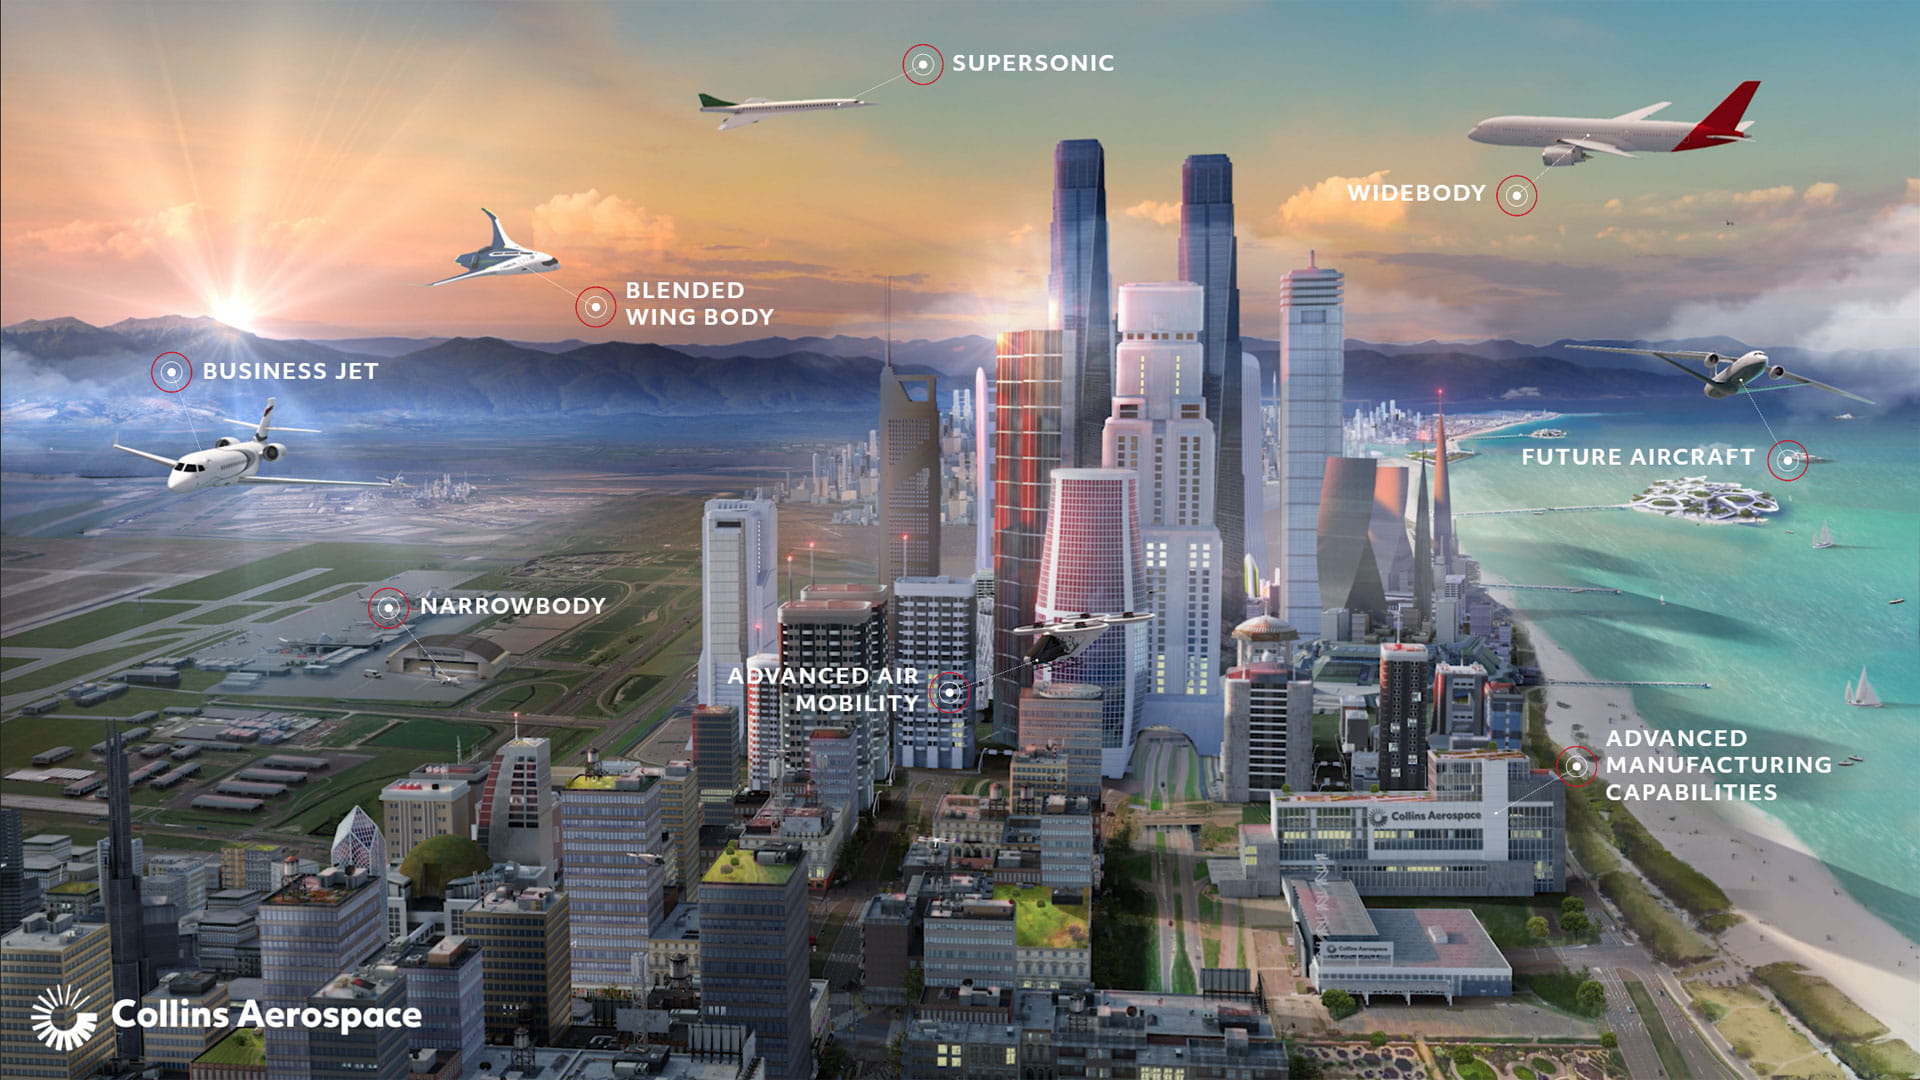 An illustration showing numerous aircraft flying around skyscrapers